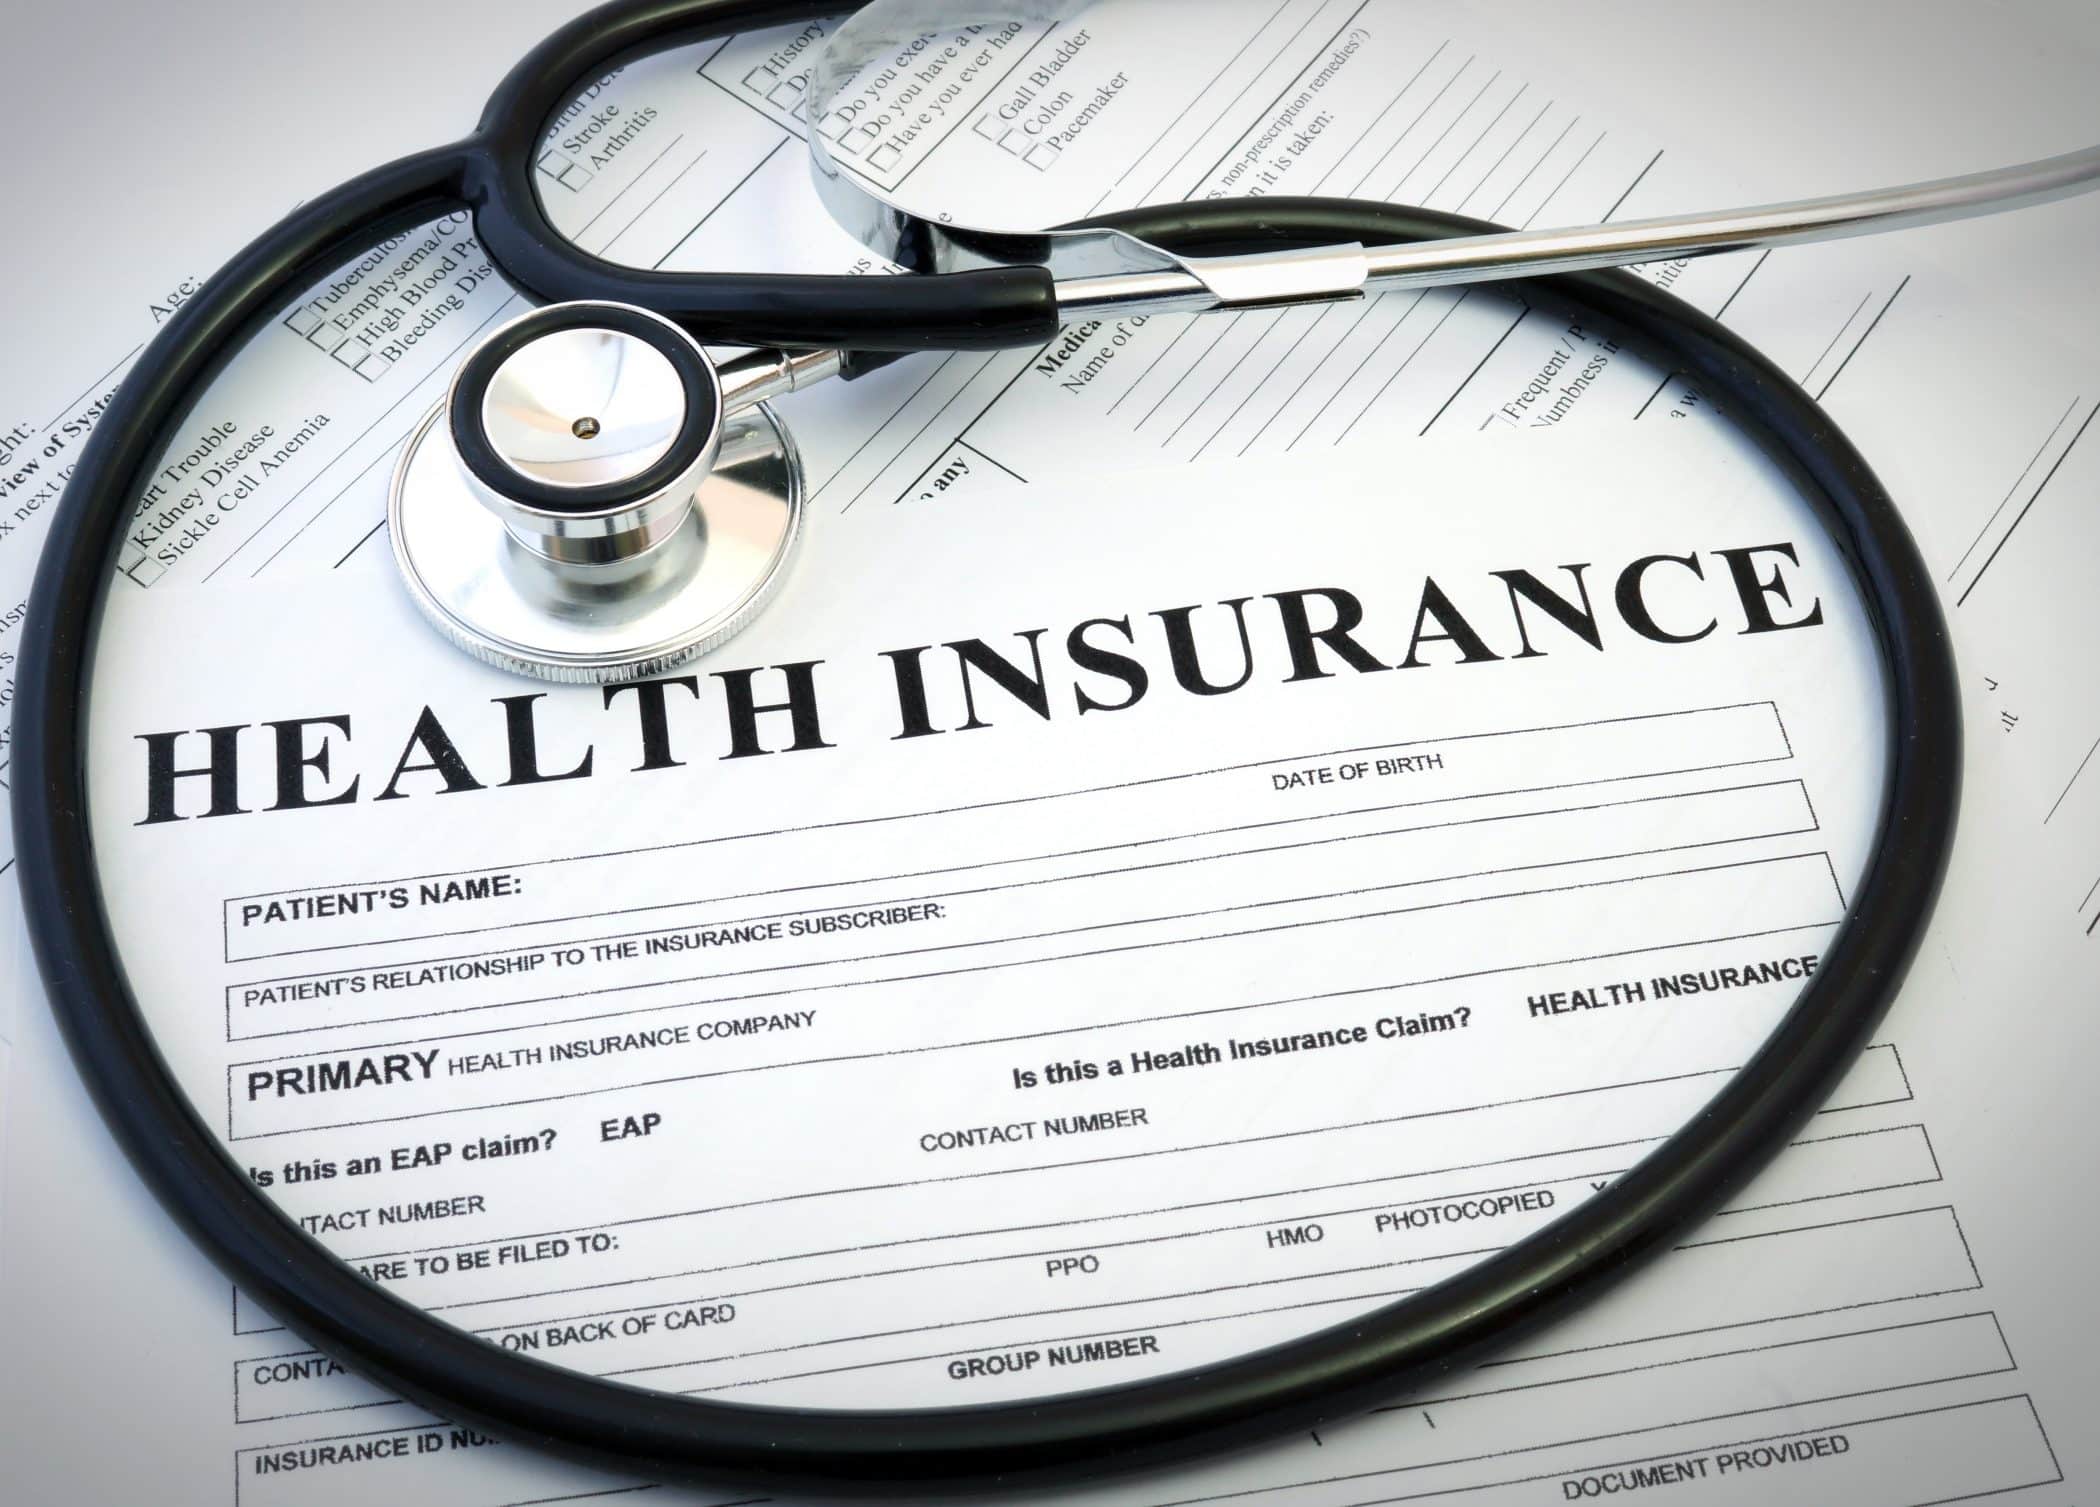 Health insurance form with stethoscope